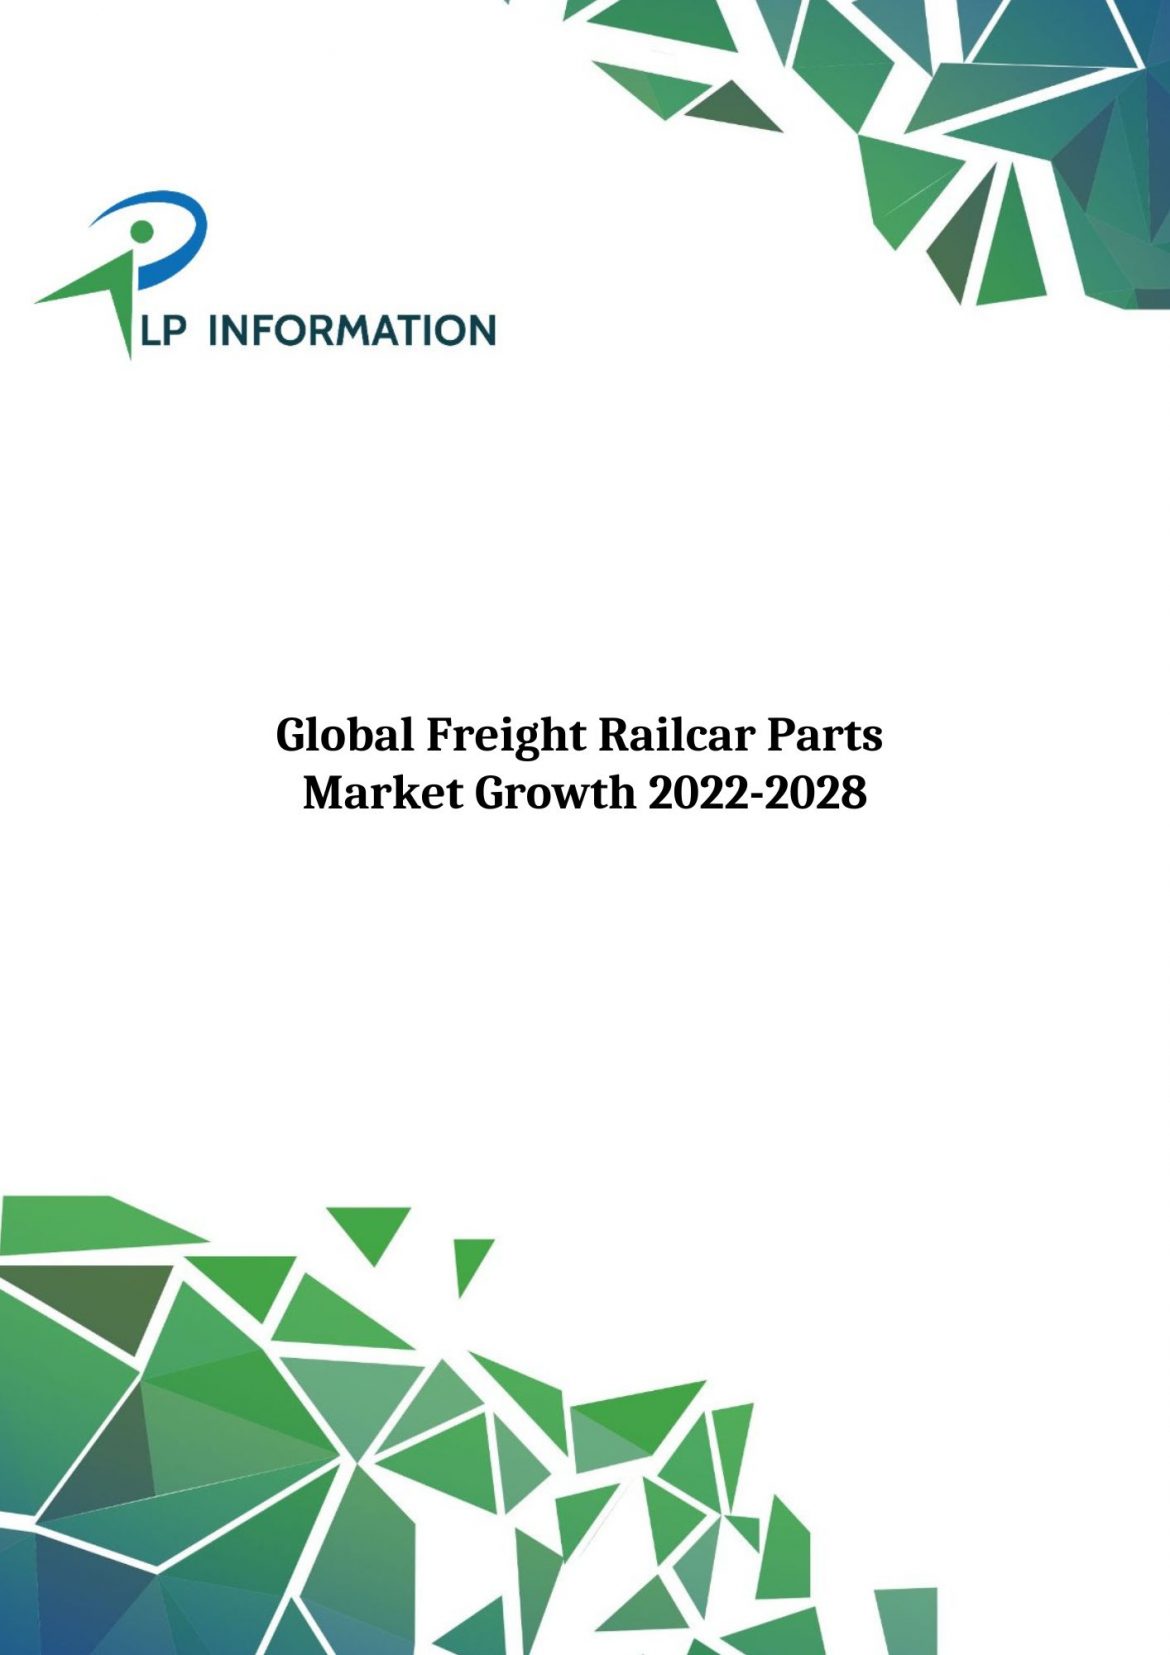 Global Freight Railcar Parts Market Growth 2022-2028